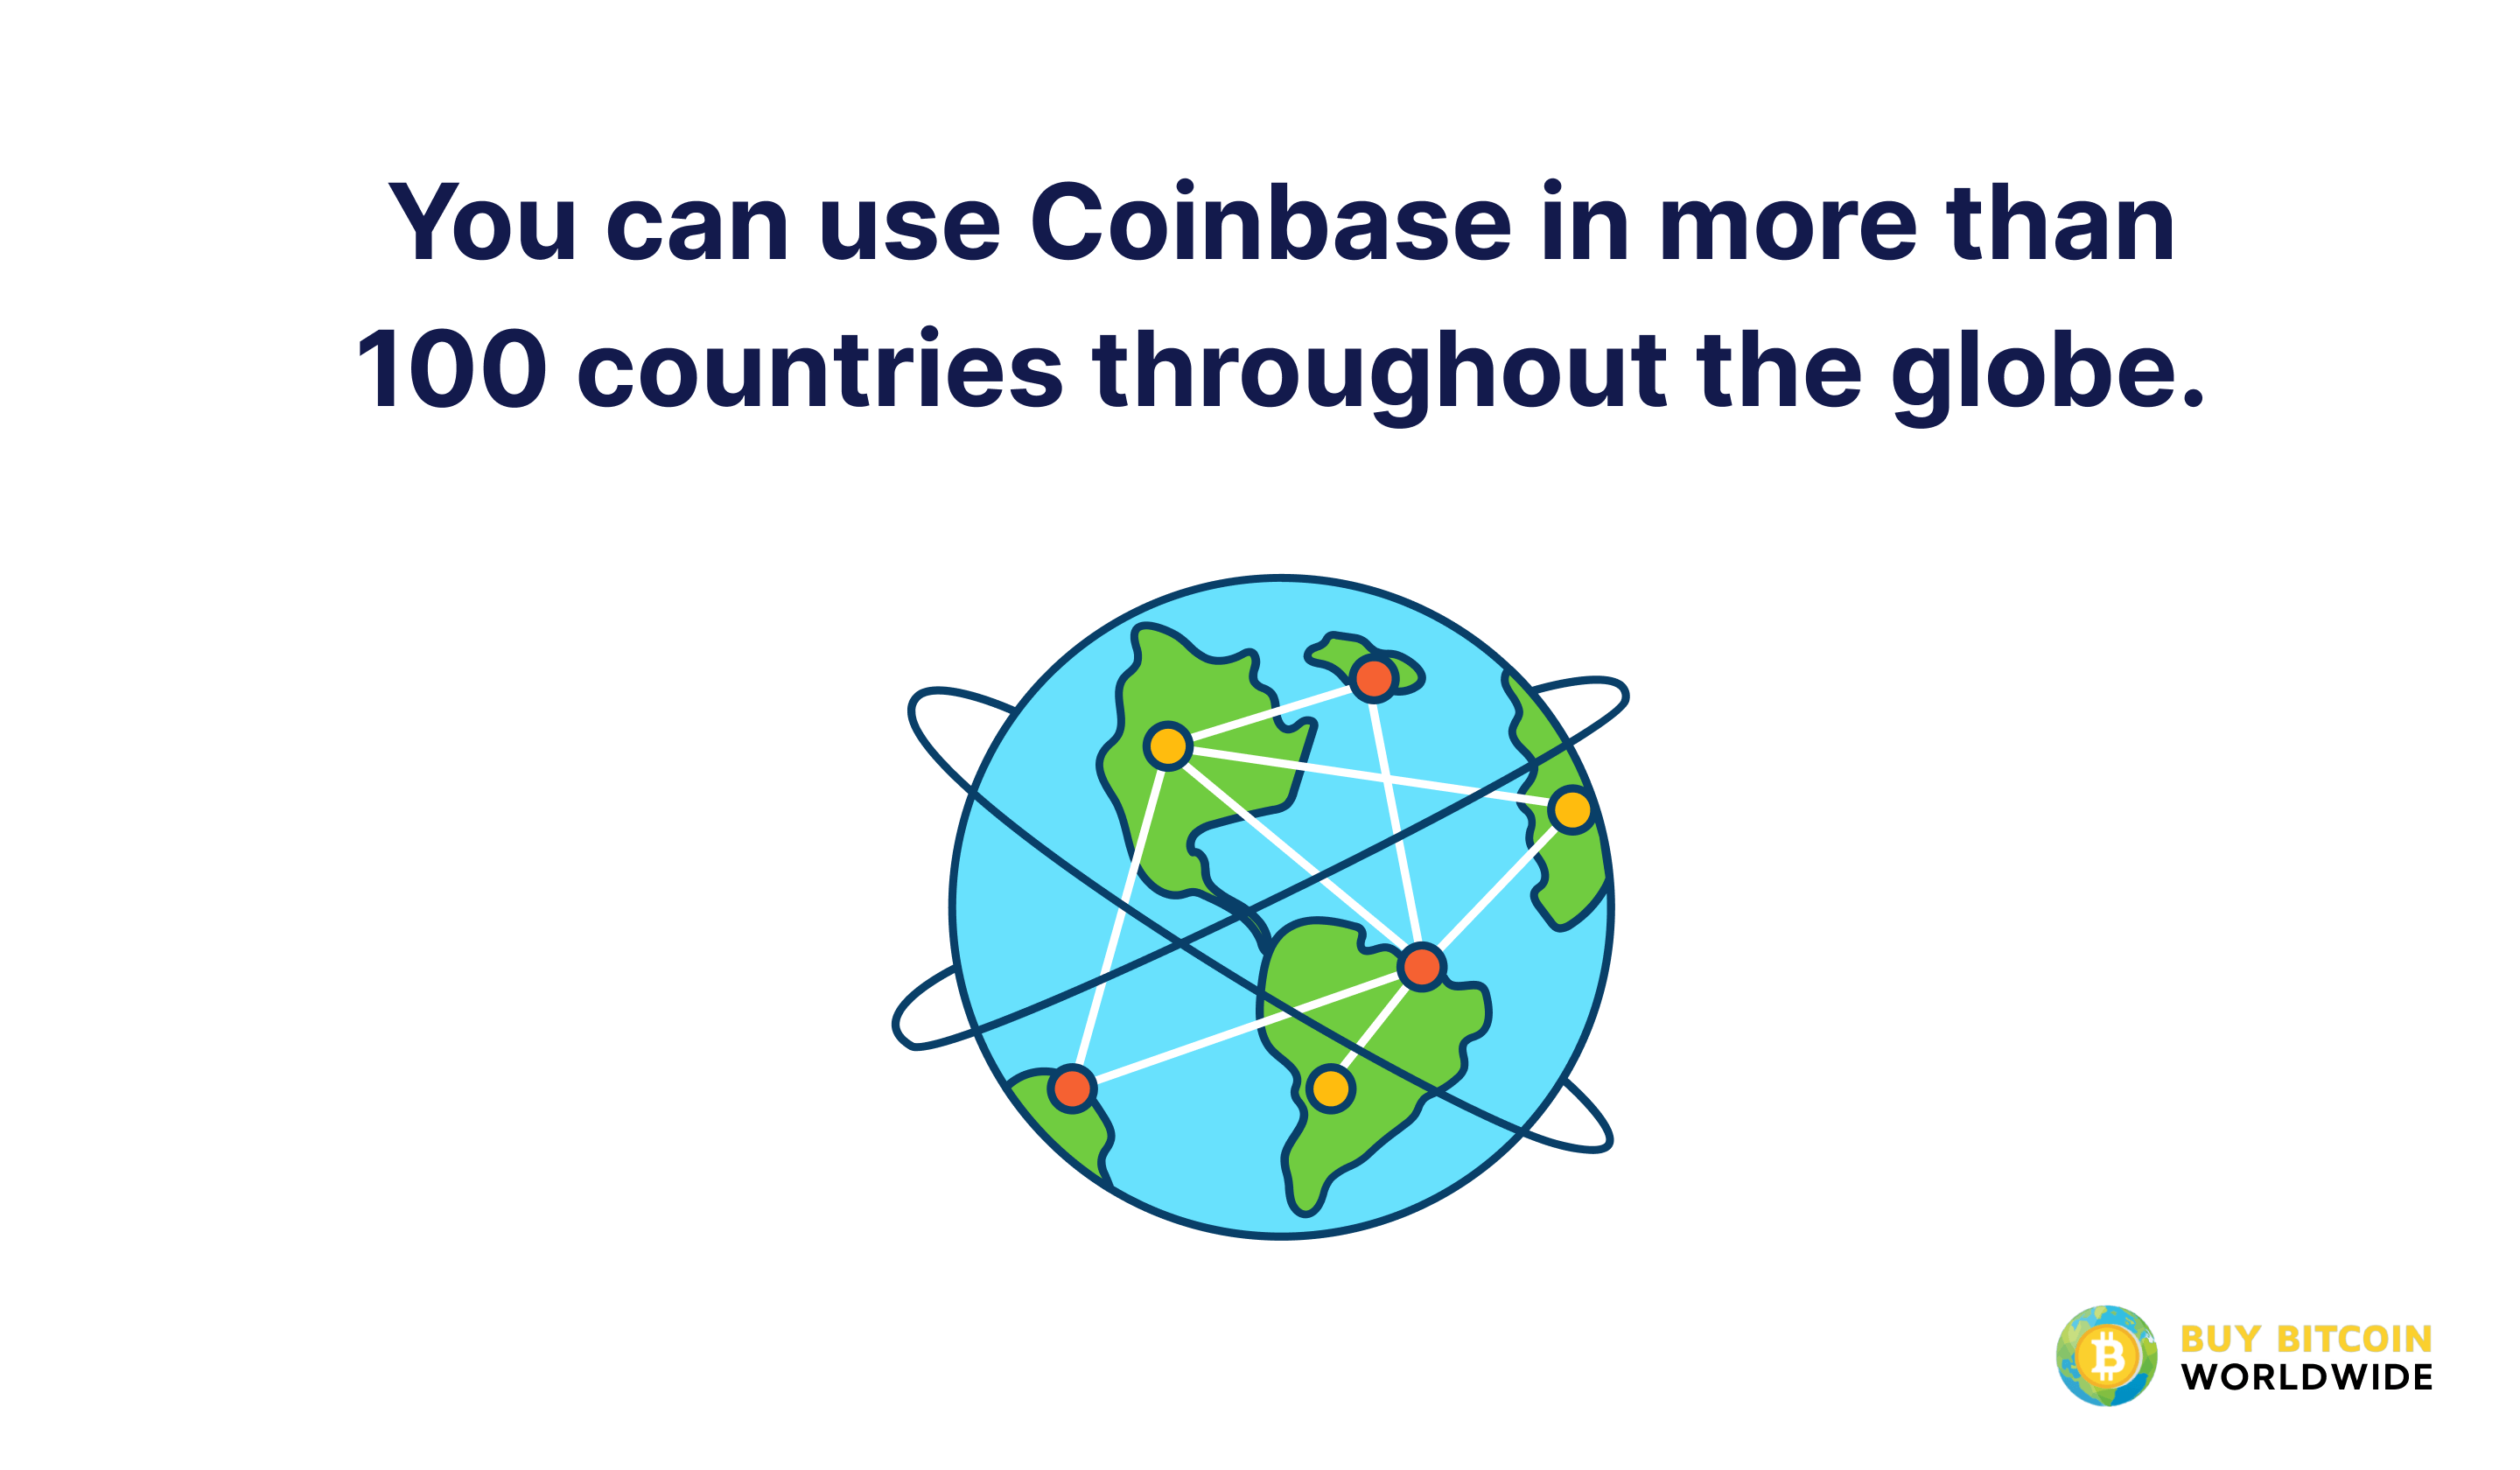 coinbase is in more than 100 countries